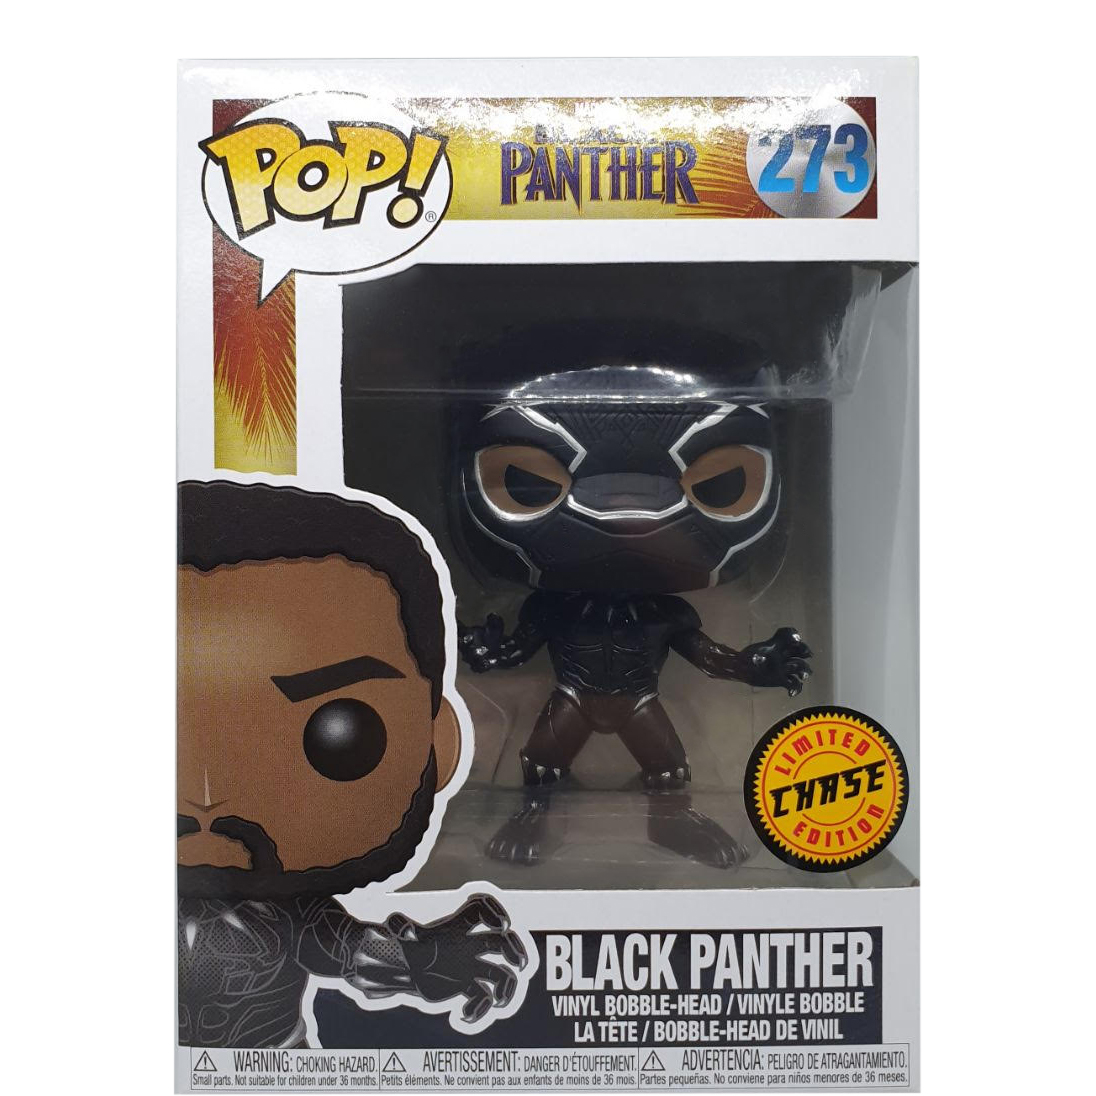 FUNKO POP BLACK PANTHER CHASE # 273 NEVER OPENED!! 